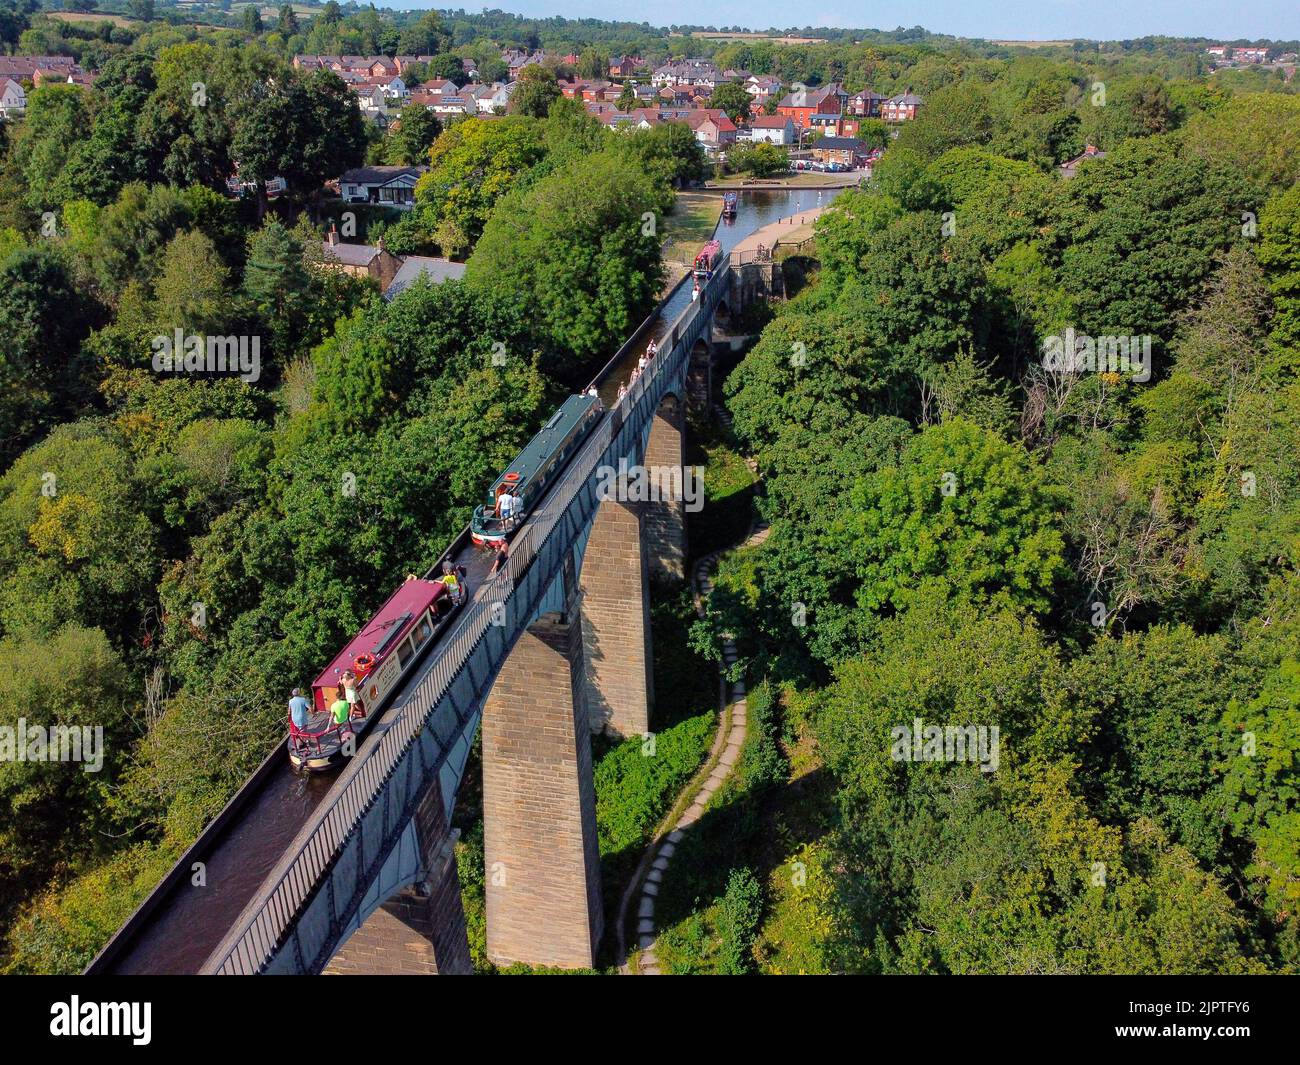 Aerial view of the Pontcysyllte Aqueduct that carries the Llangollen Canal across the River Dee in the Vale of Llangollen in northeast Wales. Stock Photo